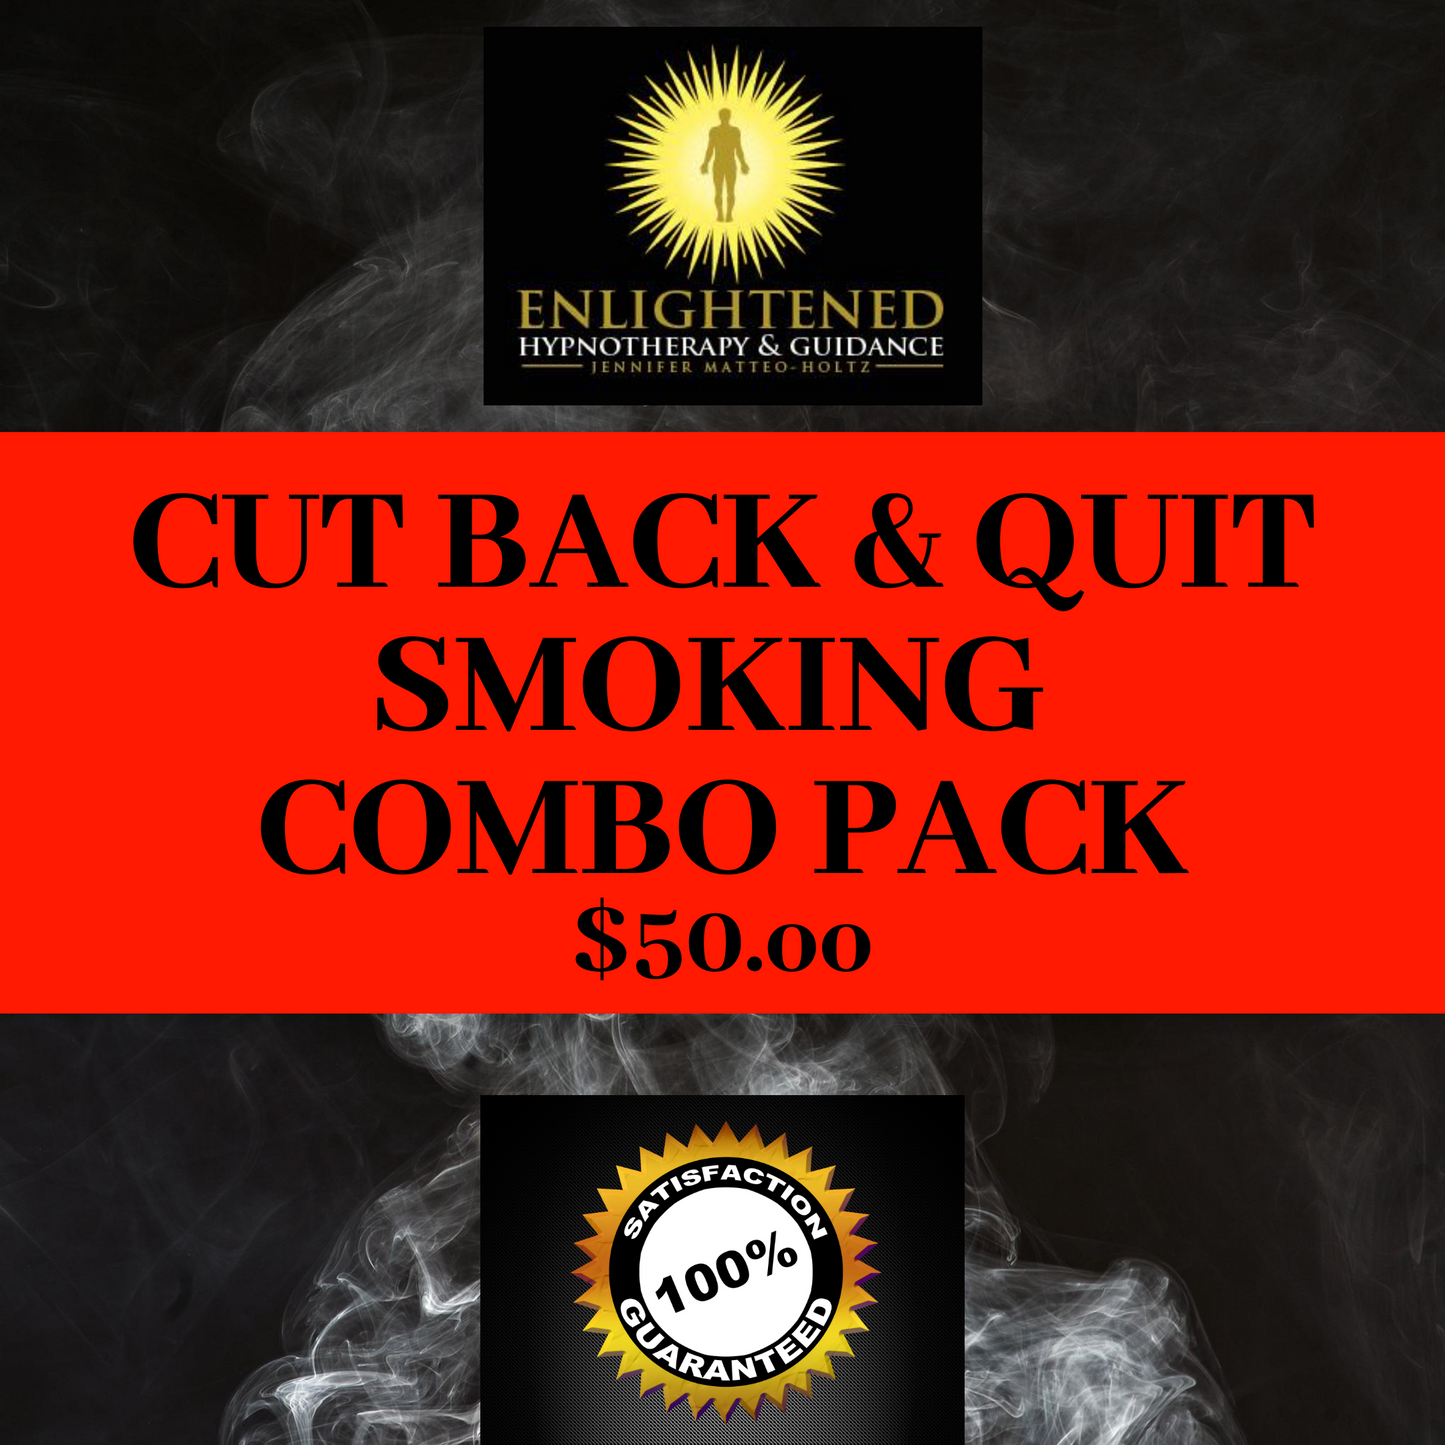 Cut Back & Quit Smoking Combo Pack